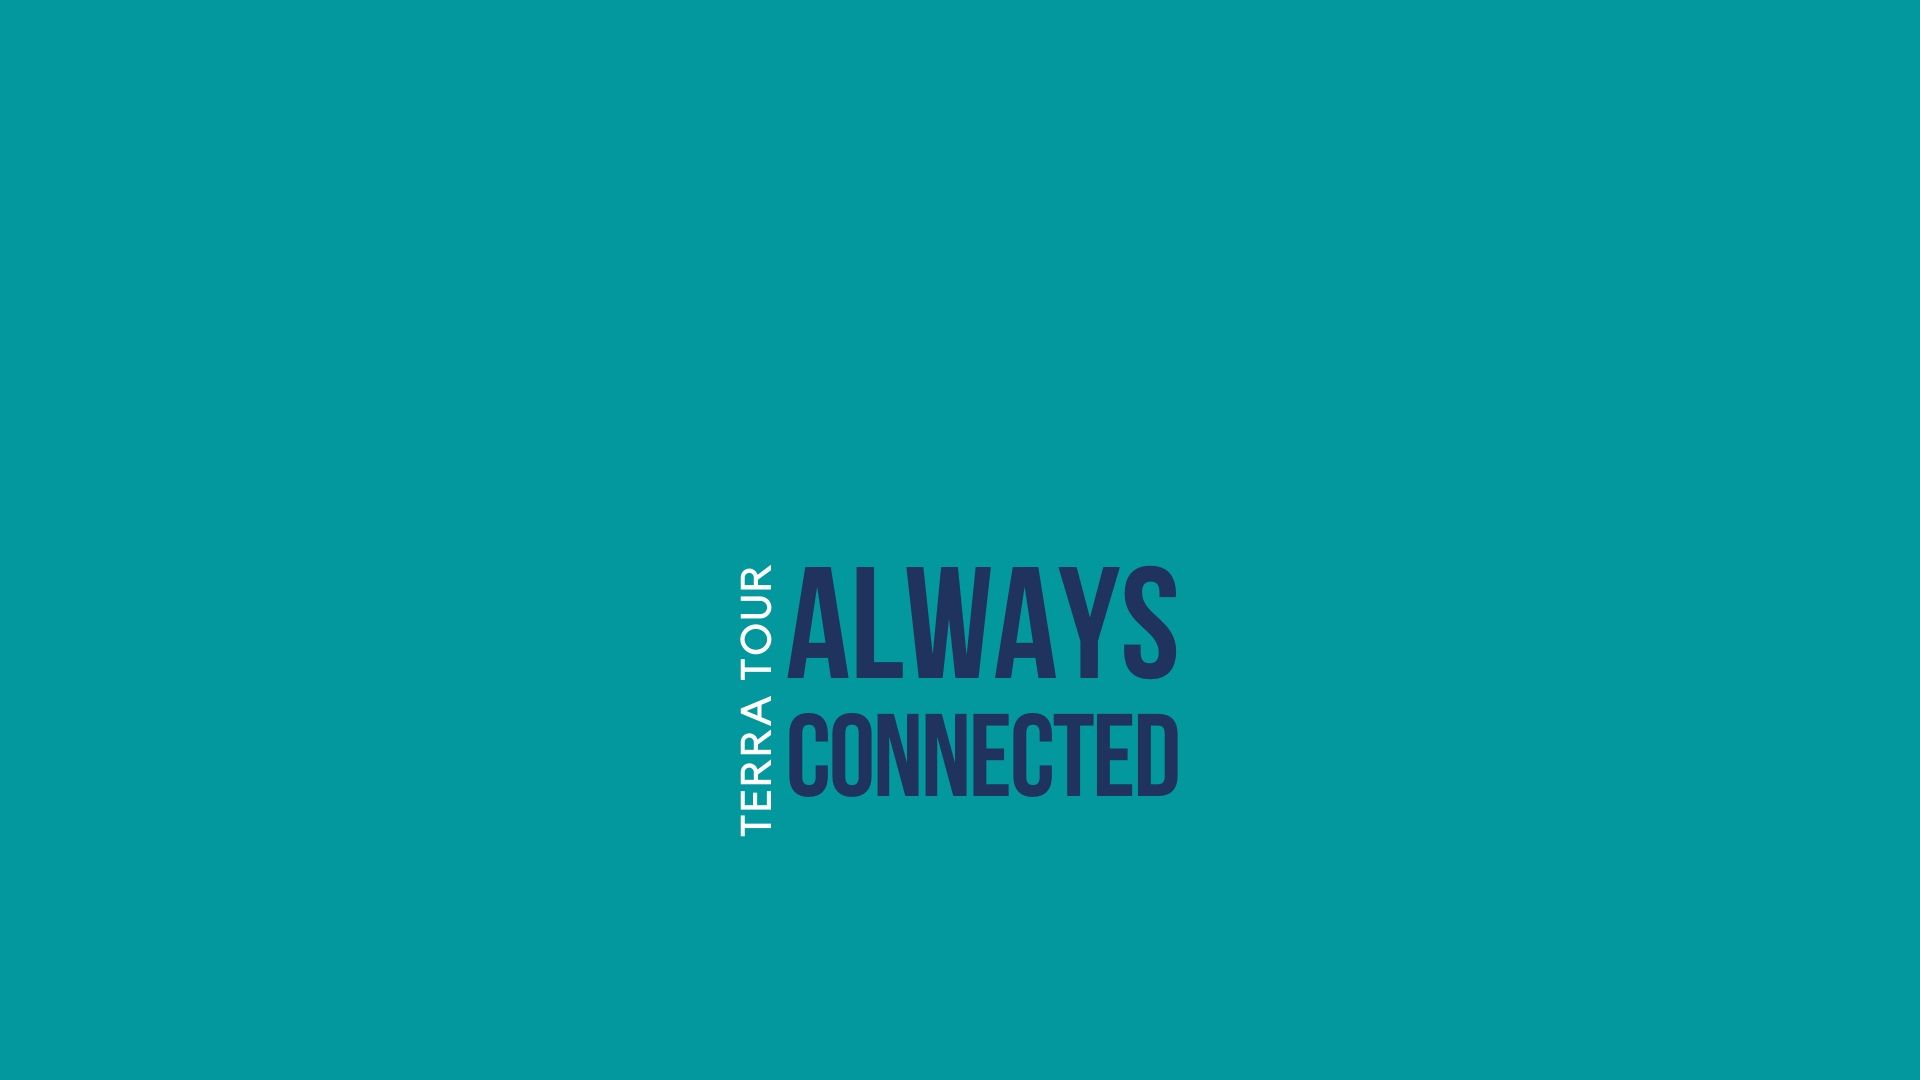 ALWAYS CONNECTED